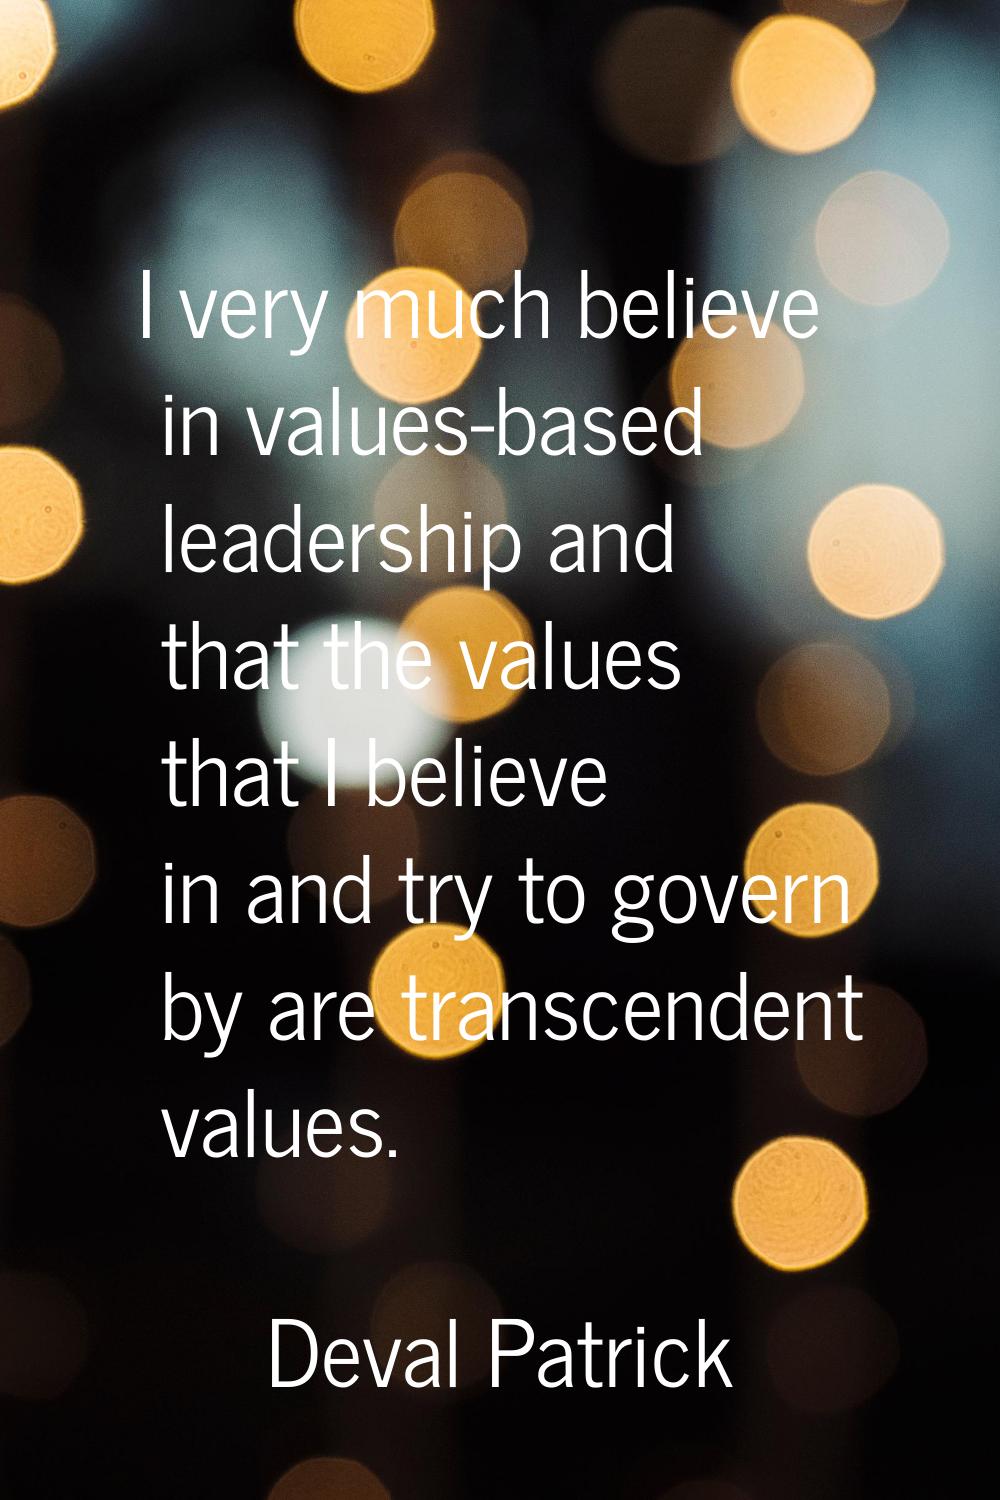 I very much believe in values-based leadership and that the values that I believe in and try to gov